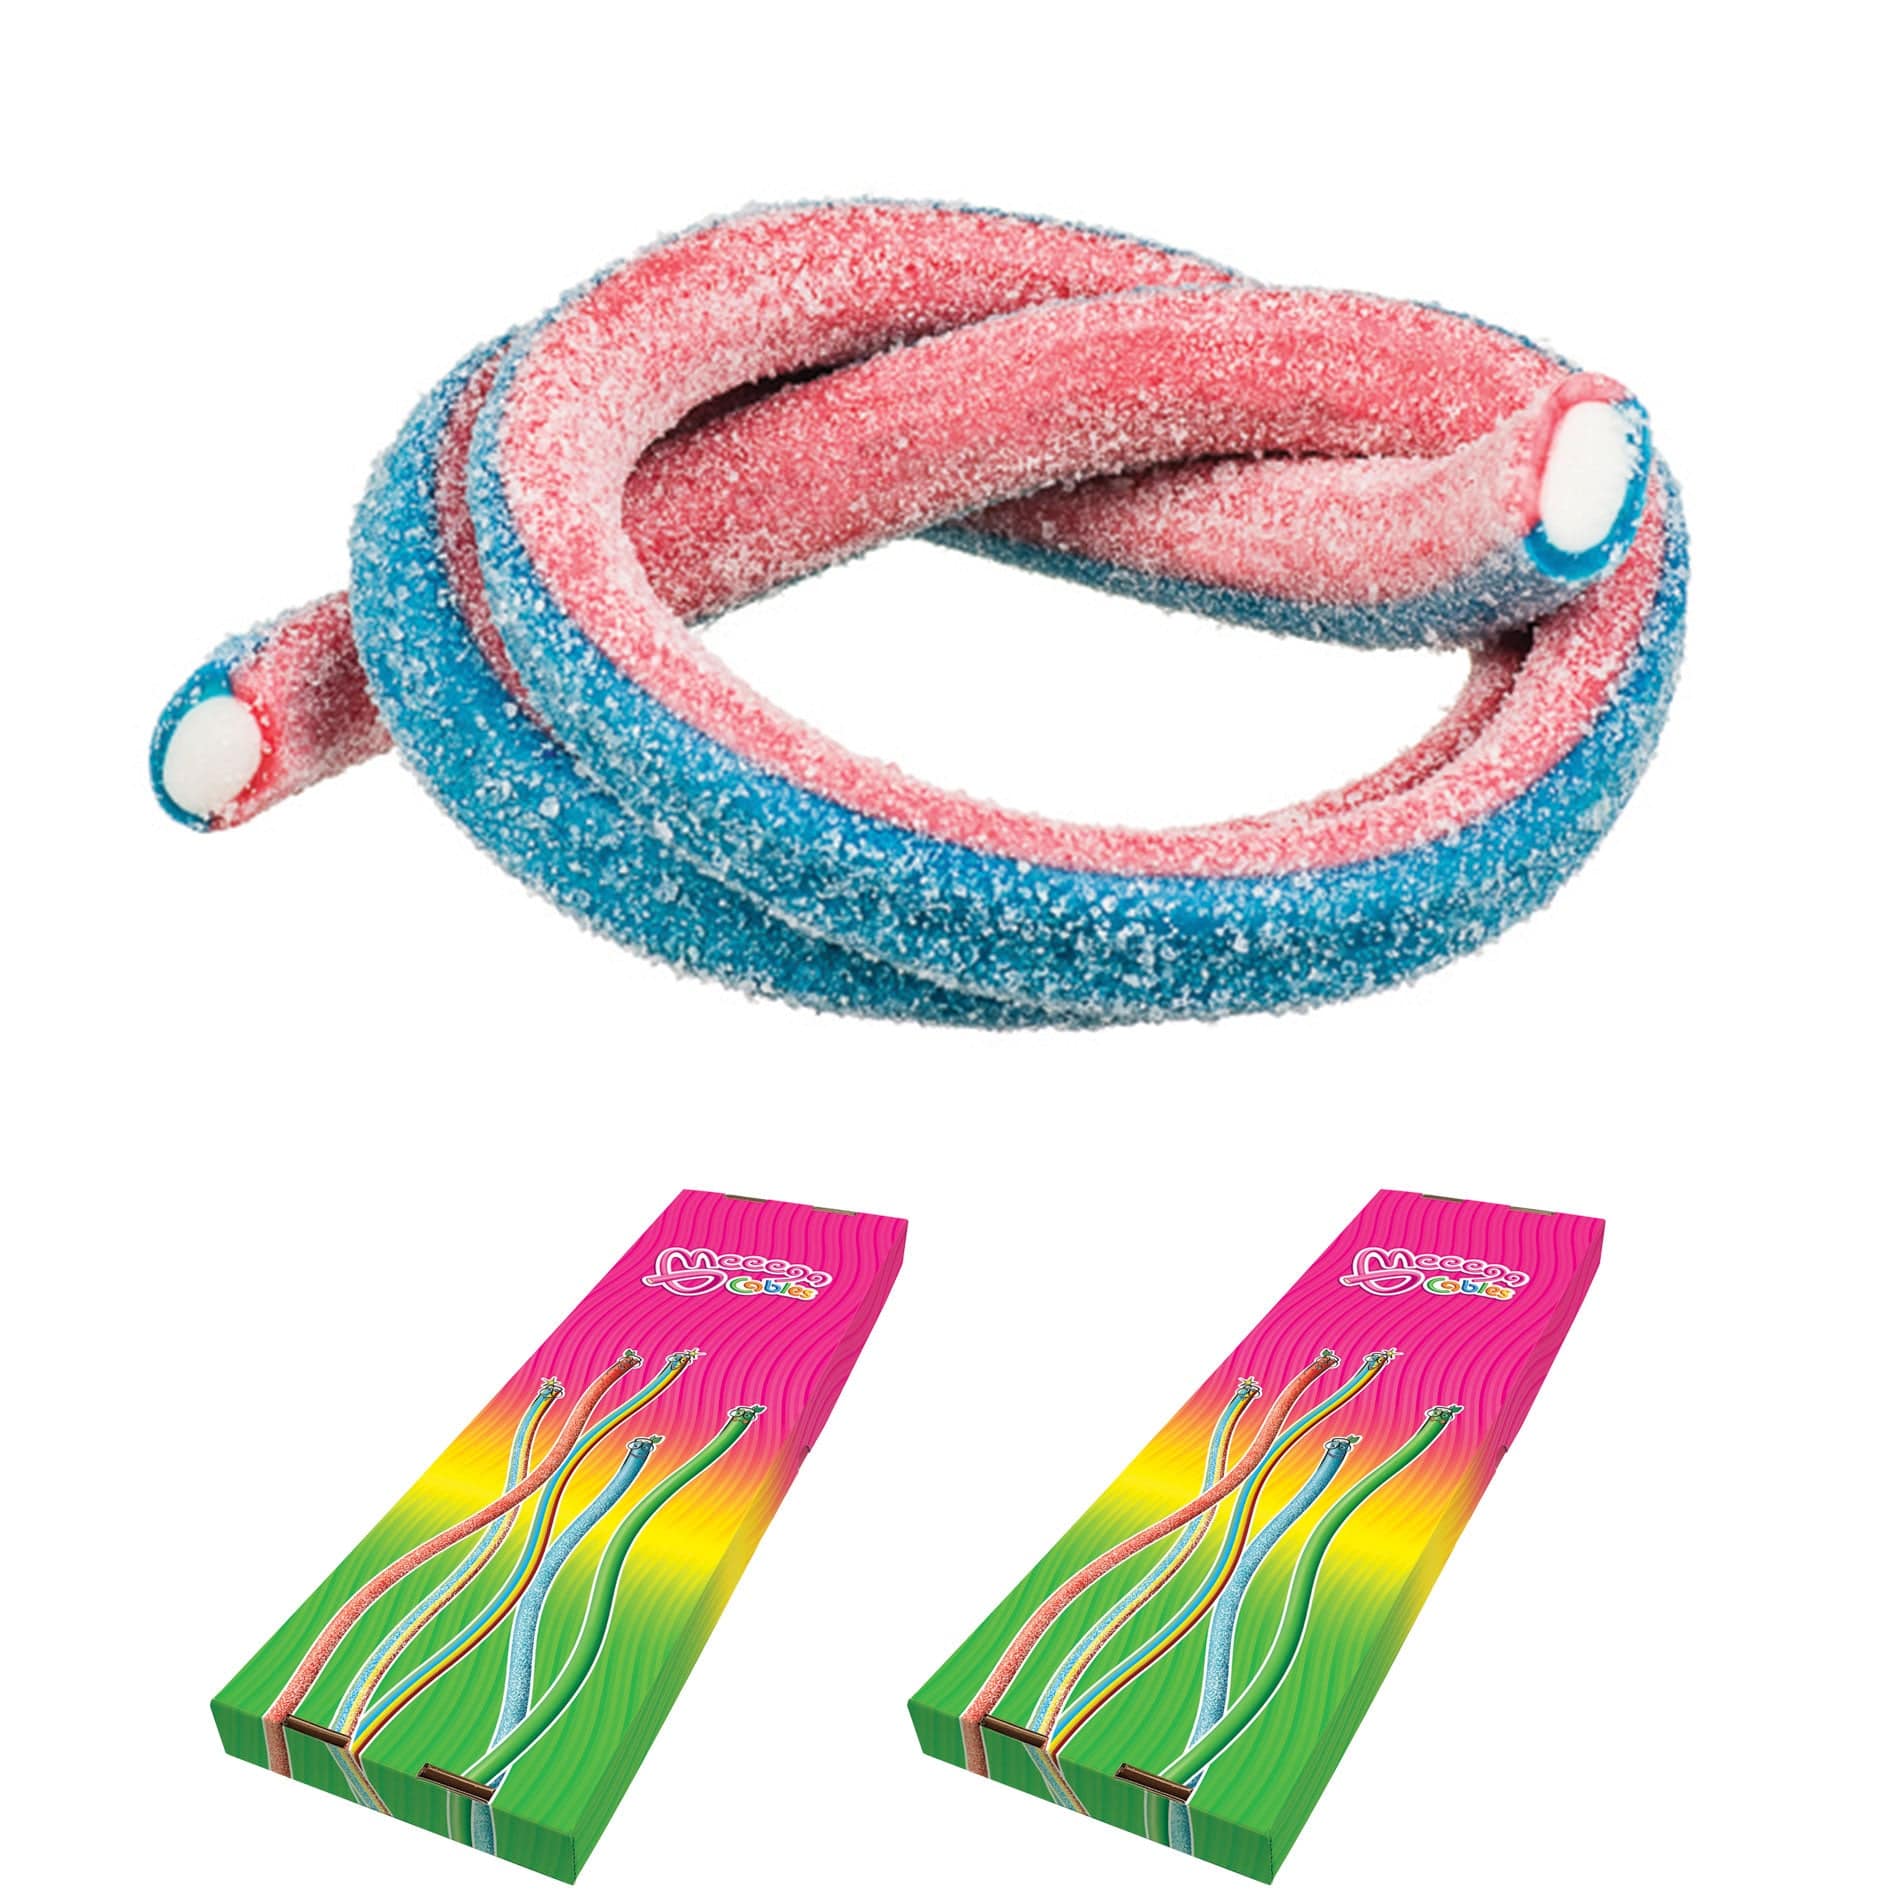 Novelty Concessions Gummy Rope SOUR BLUEBERRY STRAWBERRY / 2 Pack (60 pieces) Meeega Cables European Chewy Rope Candy - Box of 30 individually wrapped Meeega Cables, each over 2-feet long cups with lids and straws